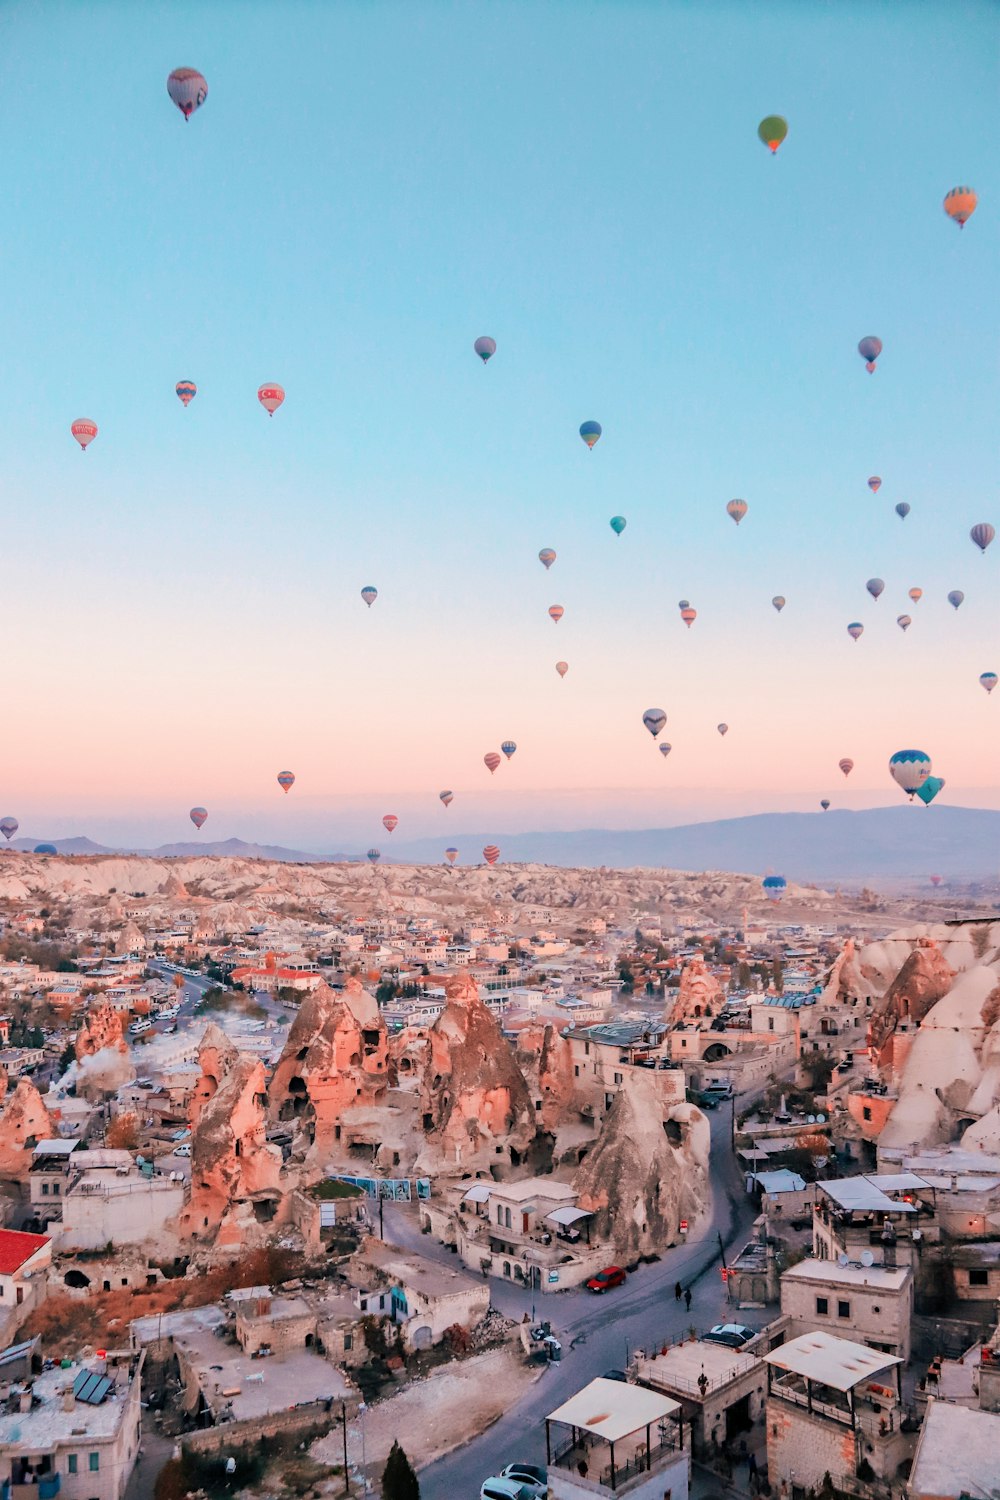 a group of hot air balloons in the sky above a city